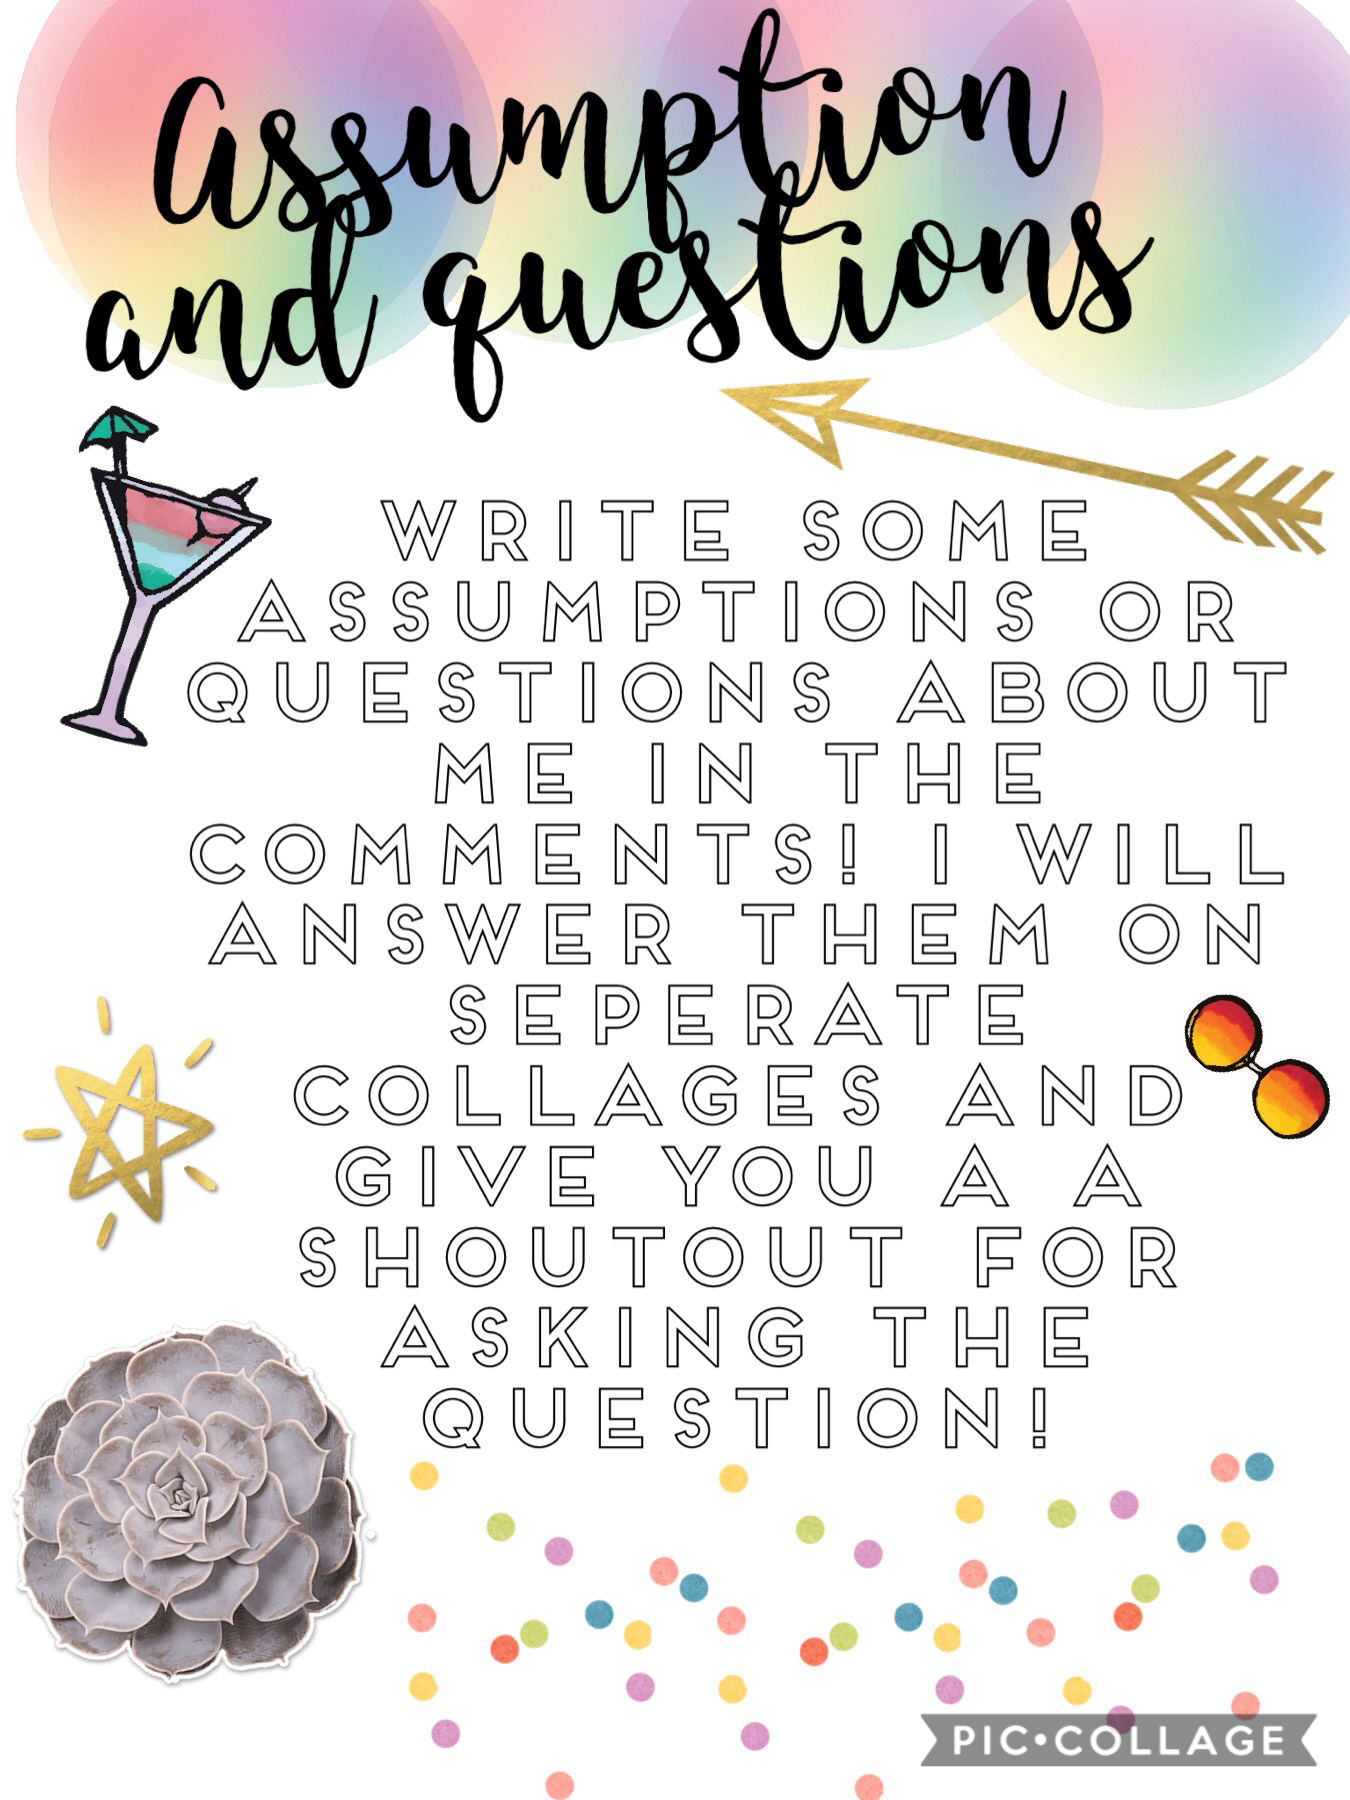 ASU OTIONS AND QUESTIONS WILL ALL BE ANSWERED! write as many as you want! Bye #madzfam 💕 